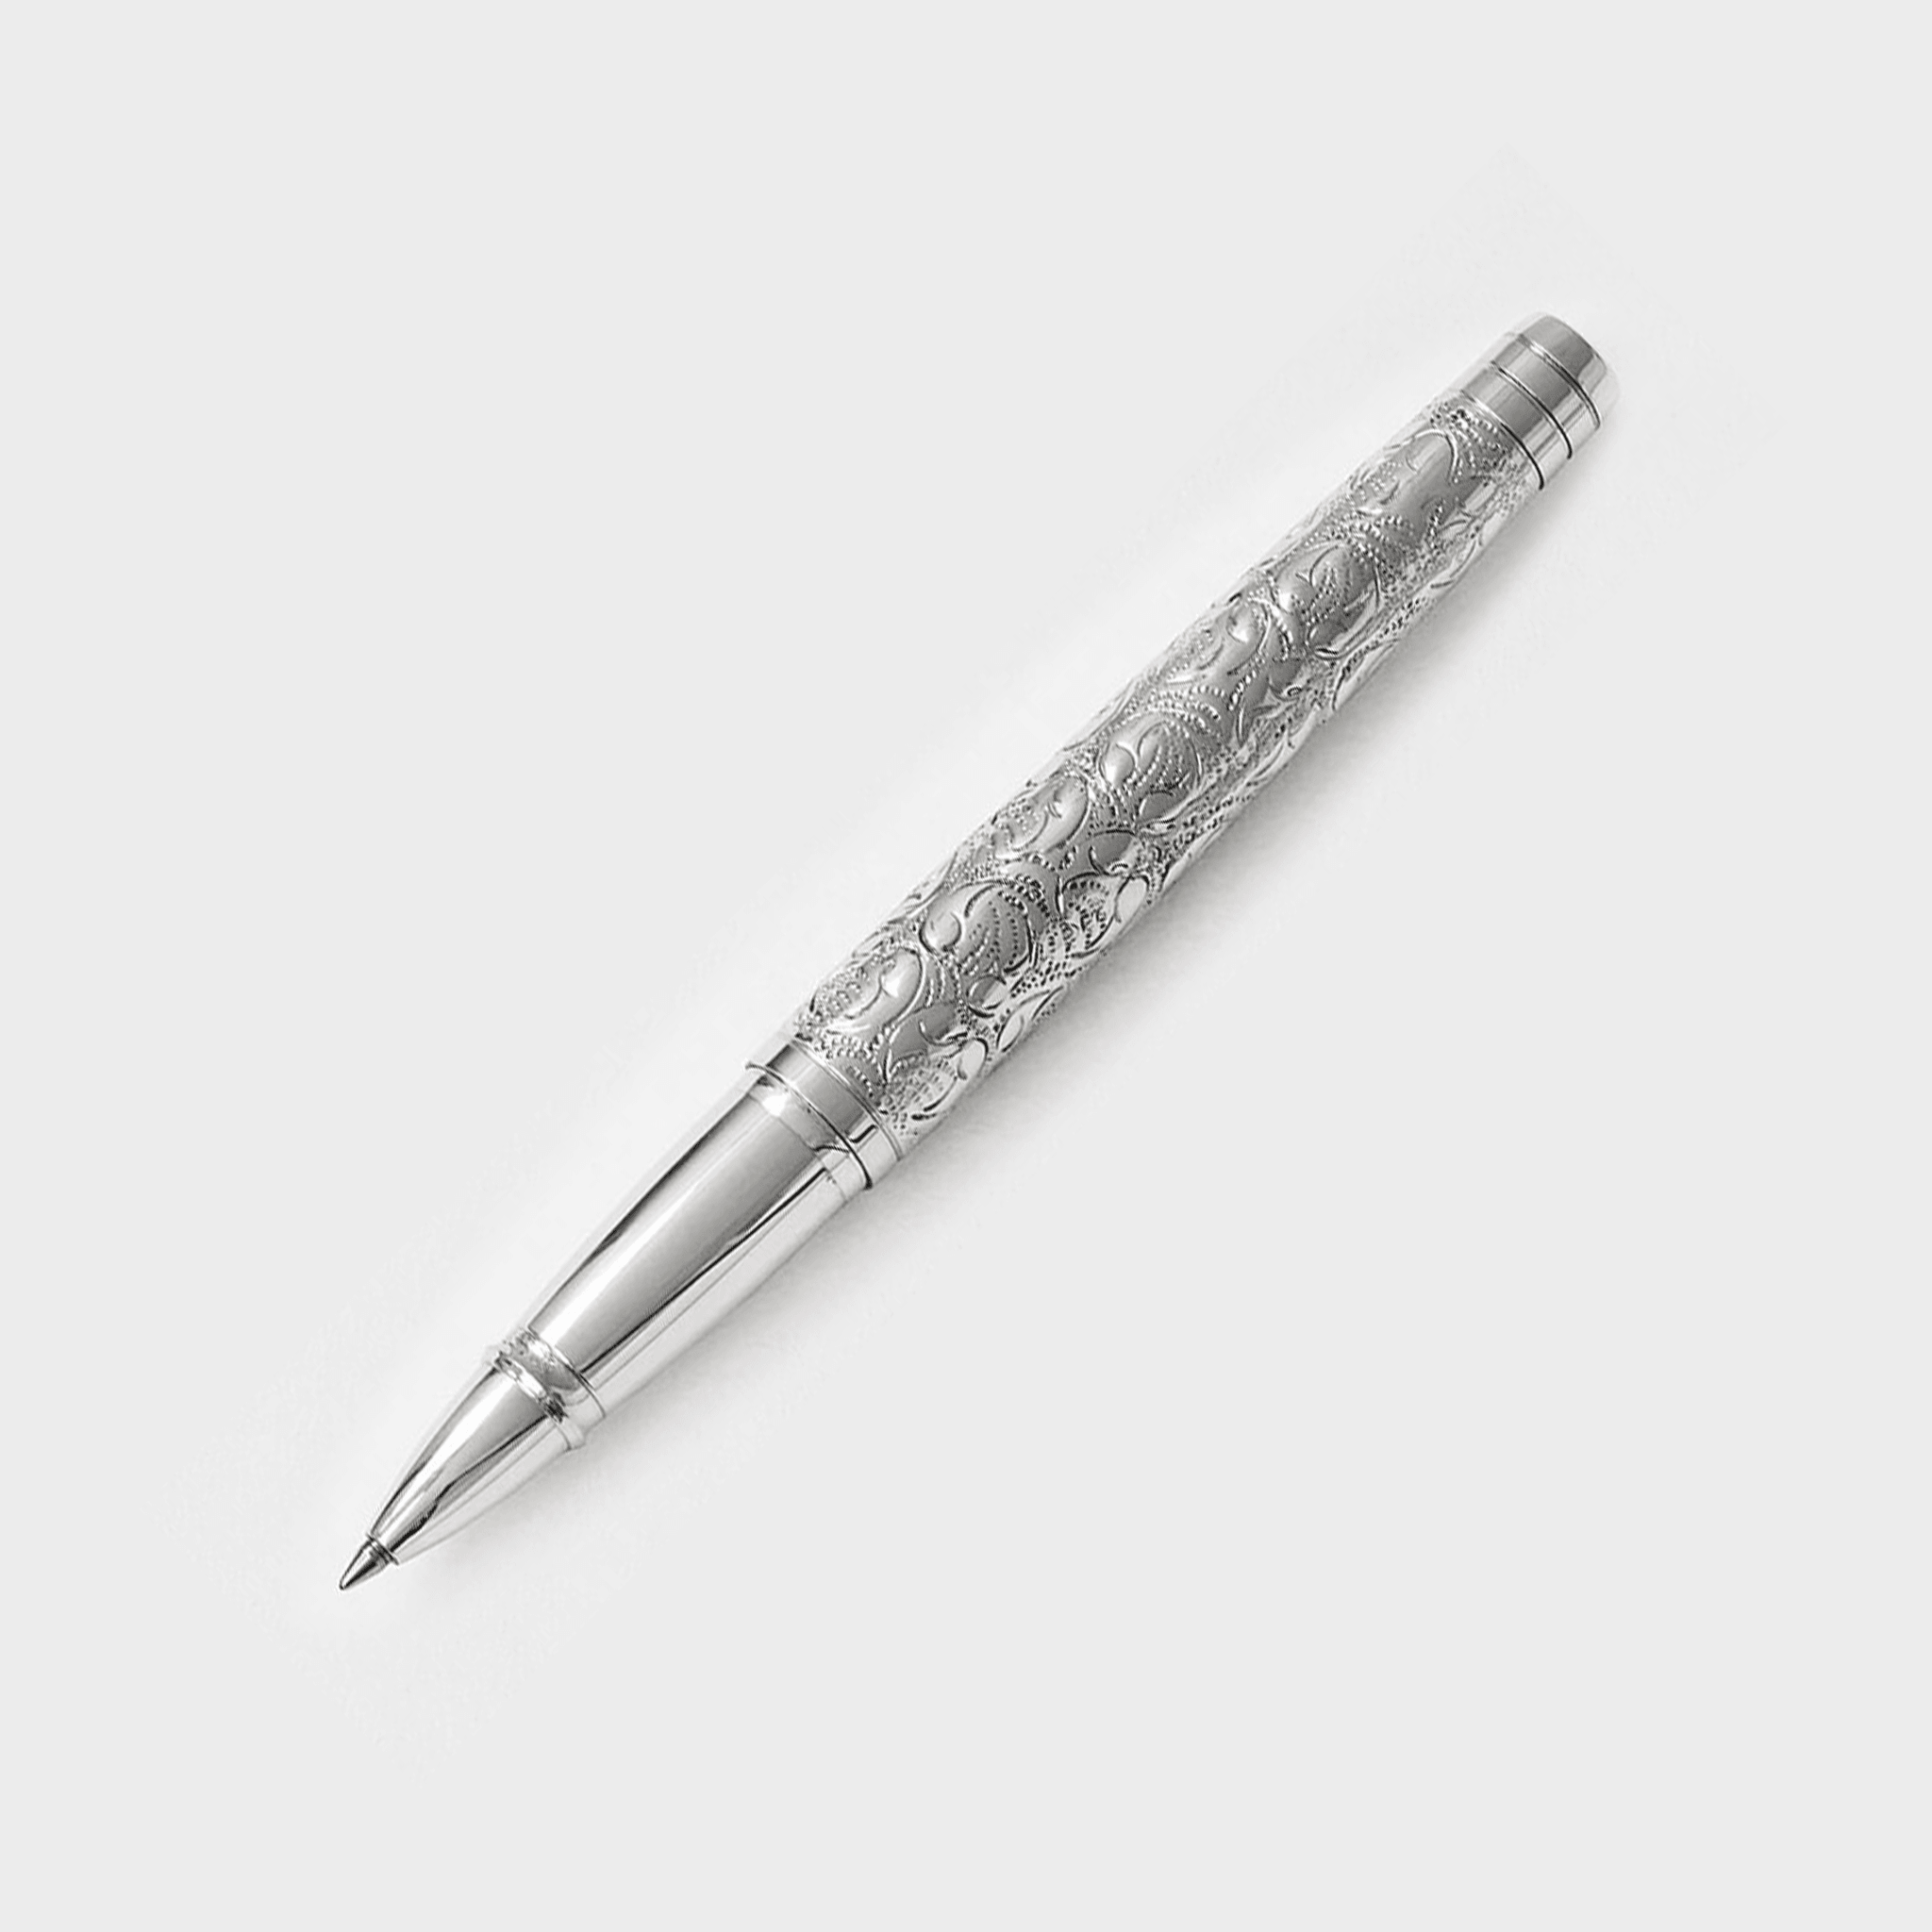 Yard-O-Led Viceroy Grand Victorian Rollerball Pen - Laywine's